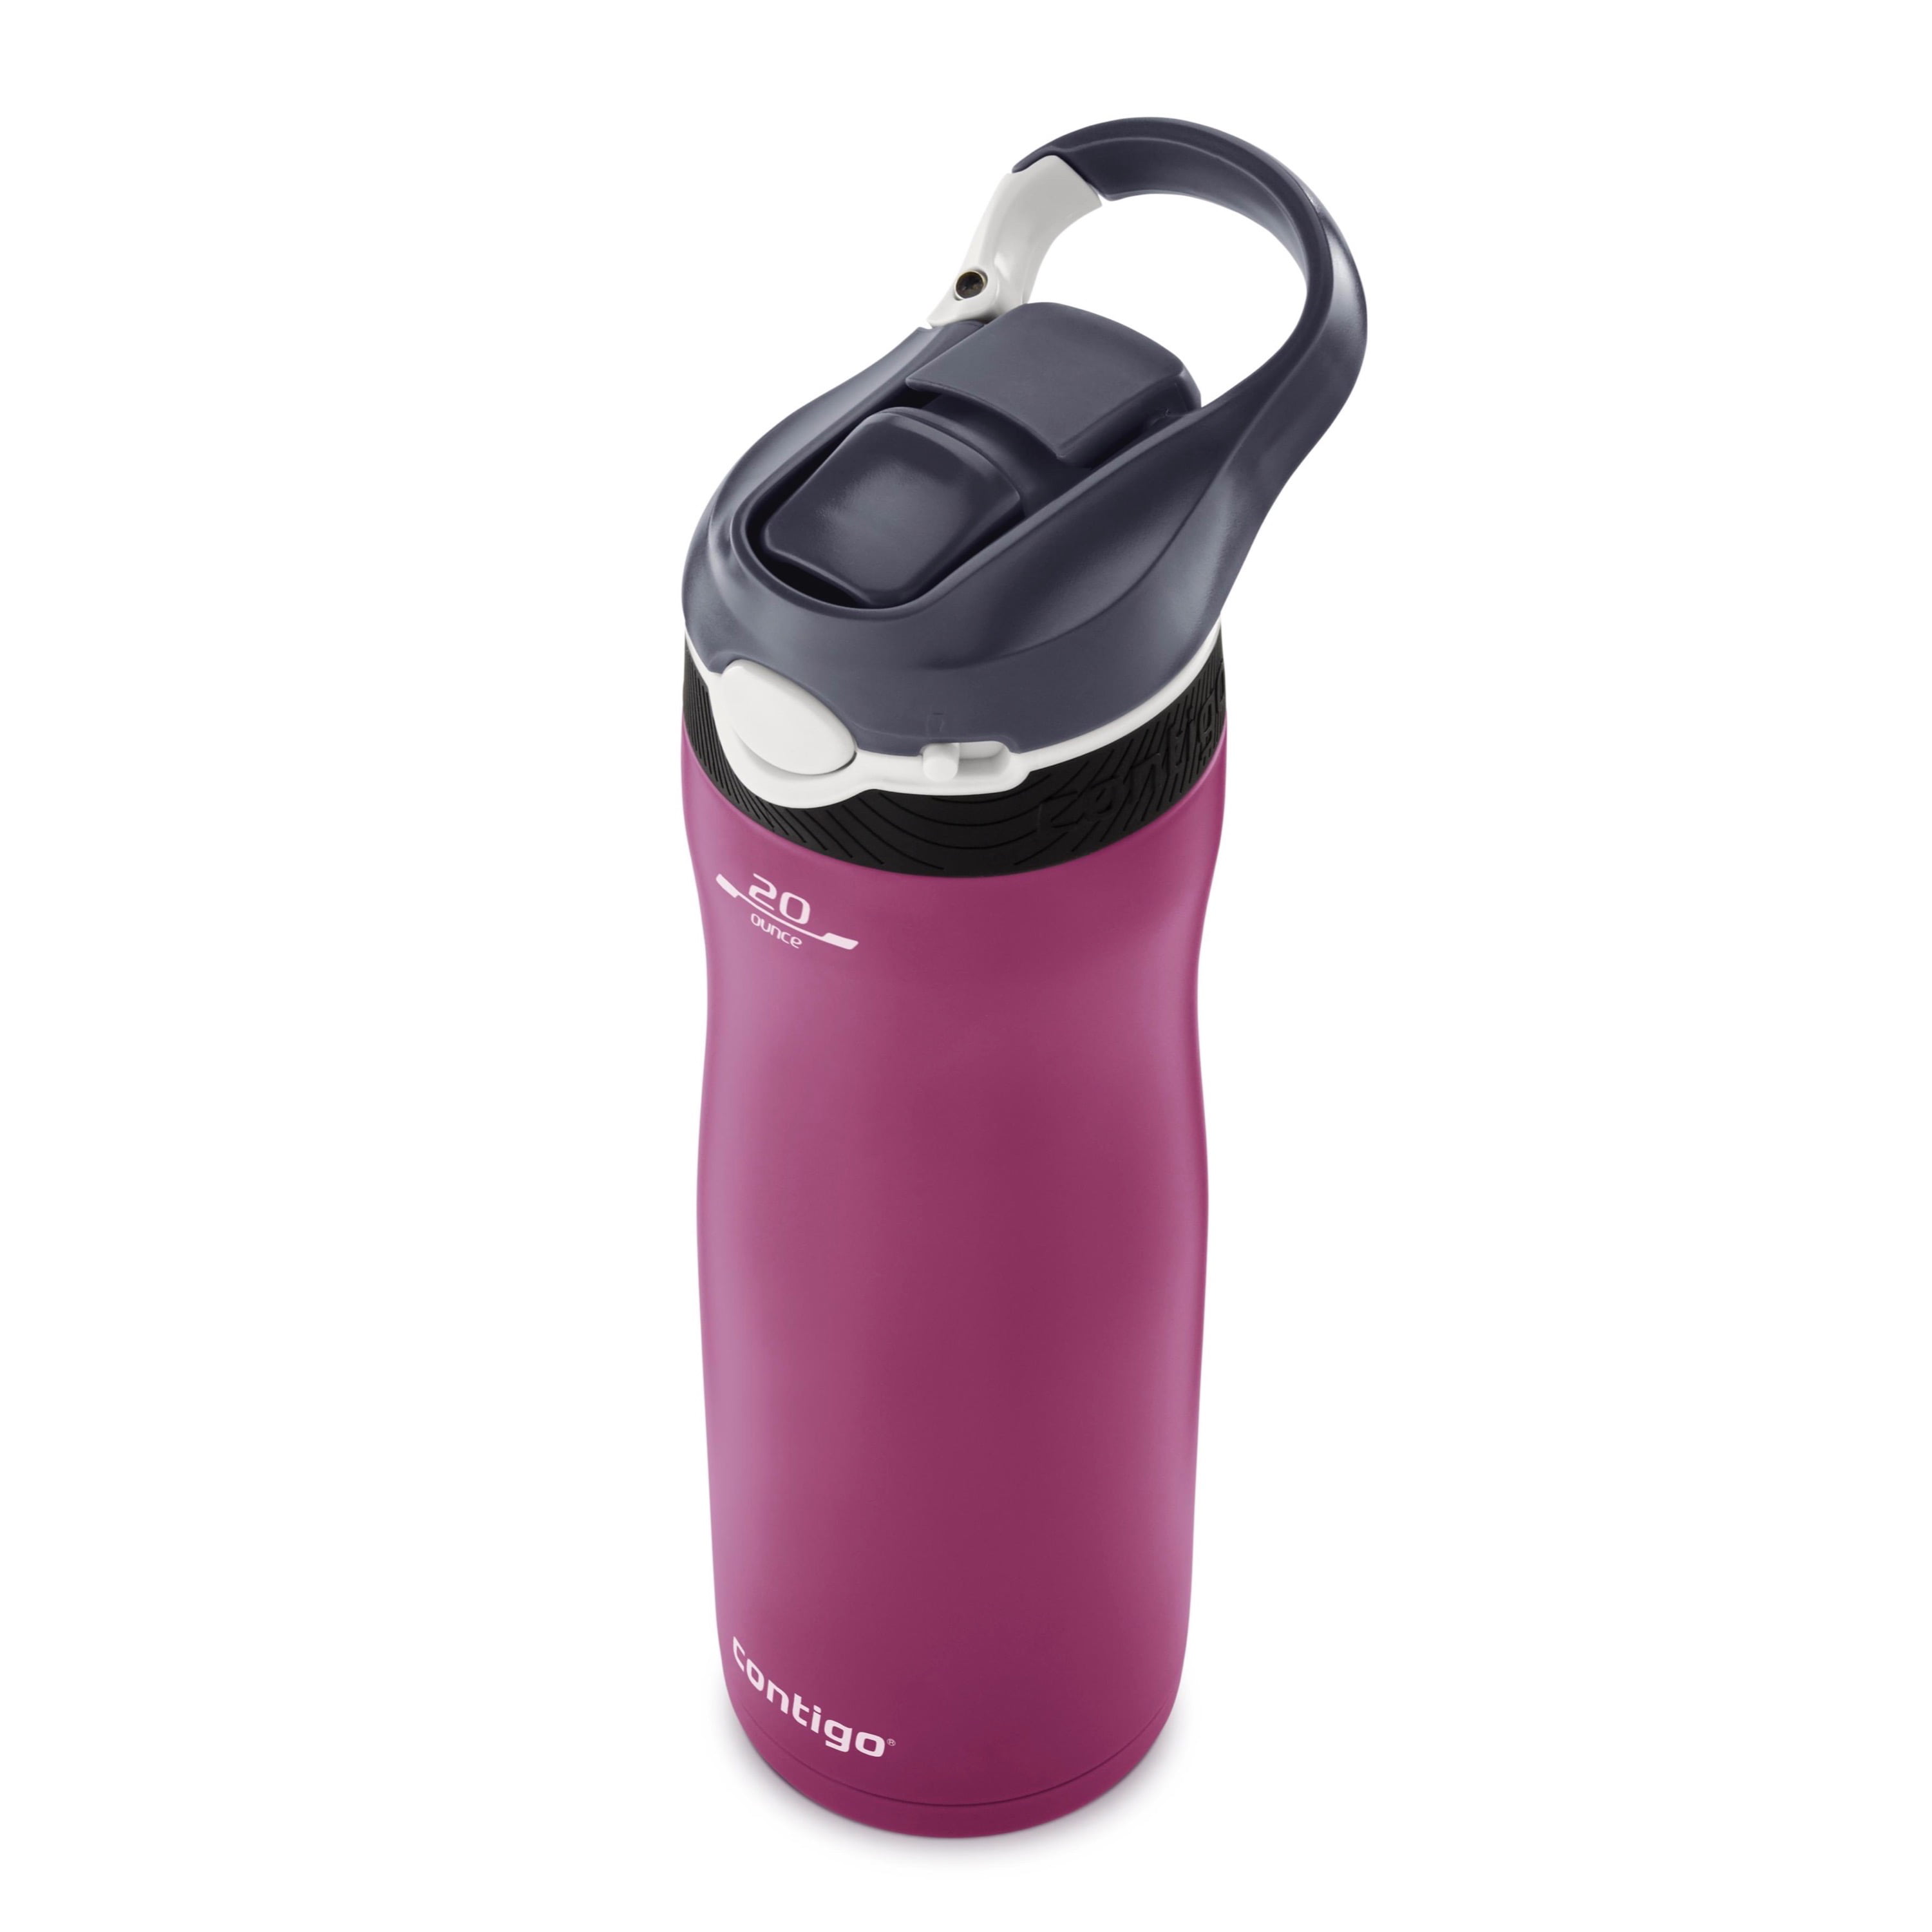 Contigo® Ashland Chill Stainless Steel Insulated Water Bottle - Blueberry,  24 oz - Pay Less Super Markets